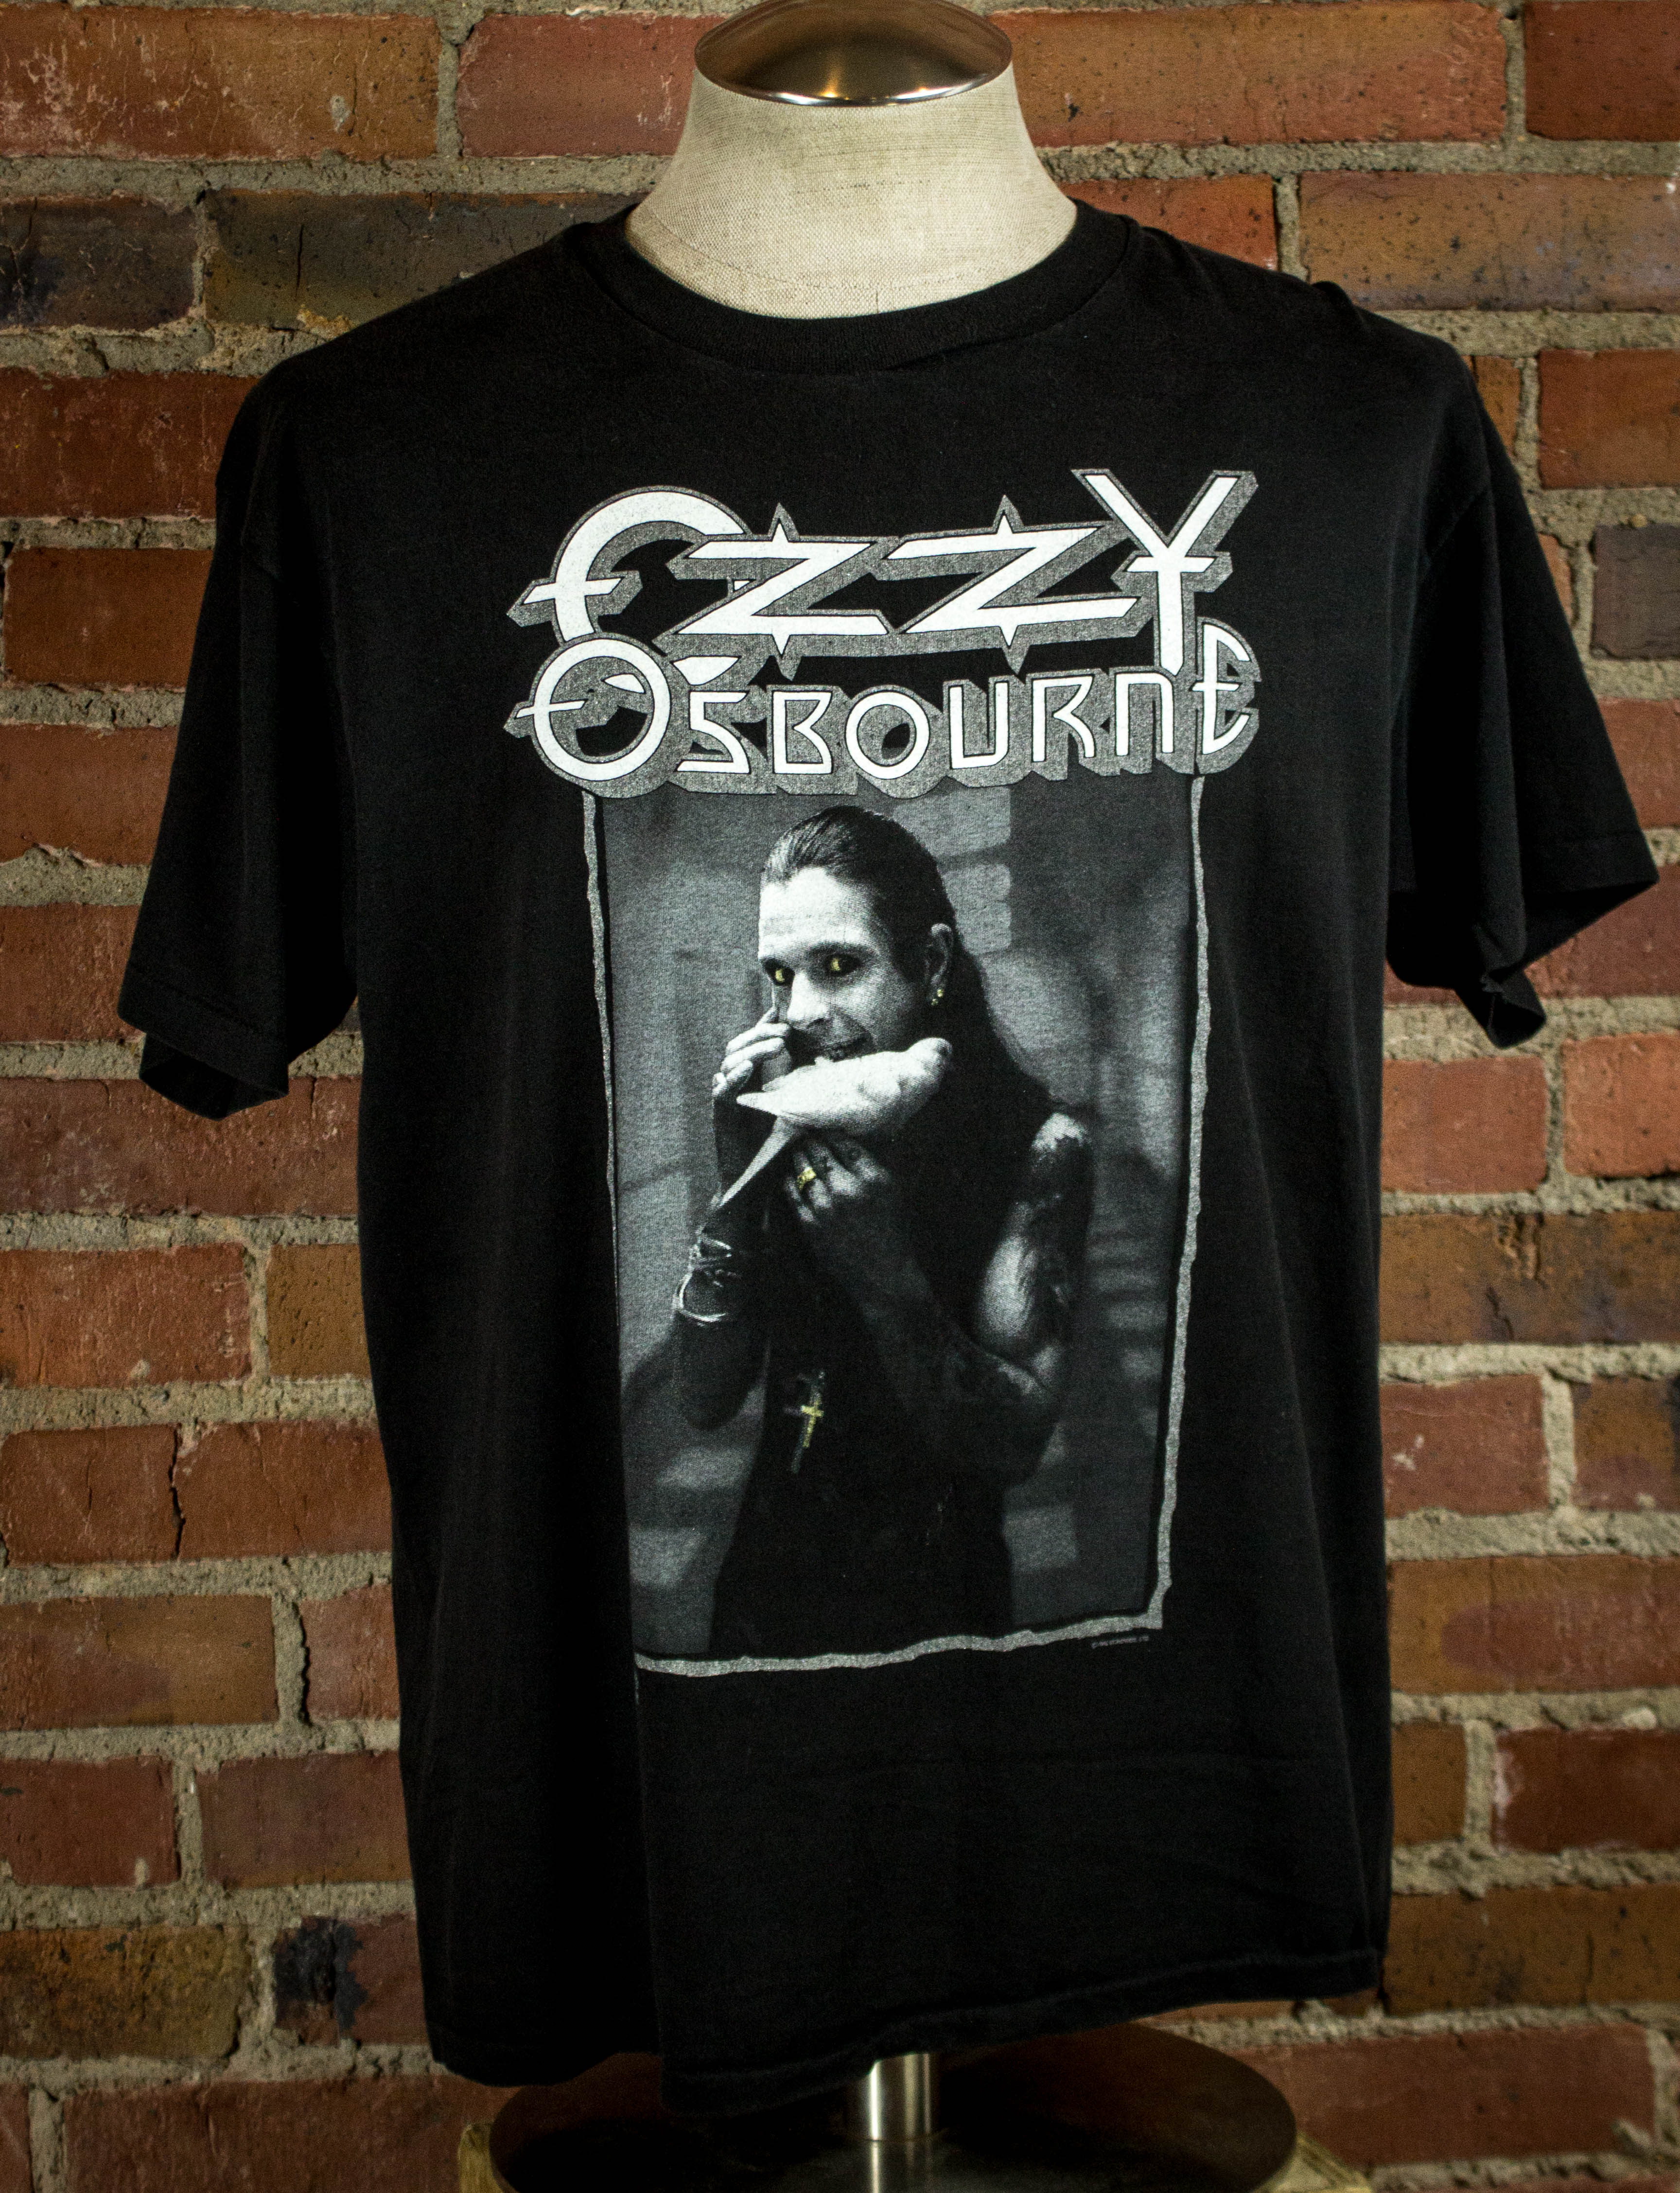 Vintage 1992 Ozzy Osbourne The Last Bloody Shows Costa Mesa CA Concert